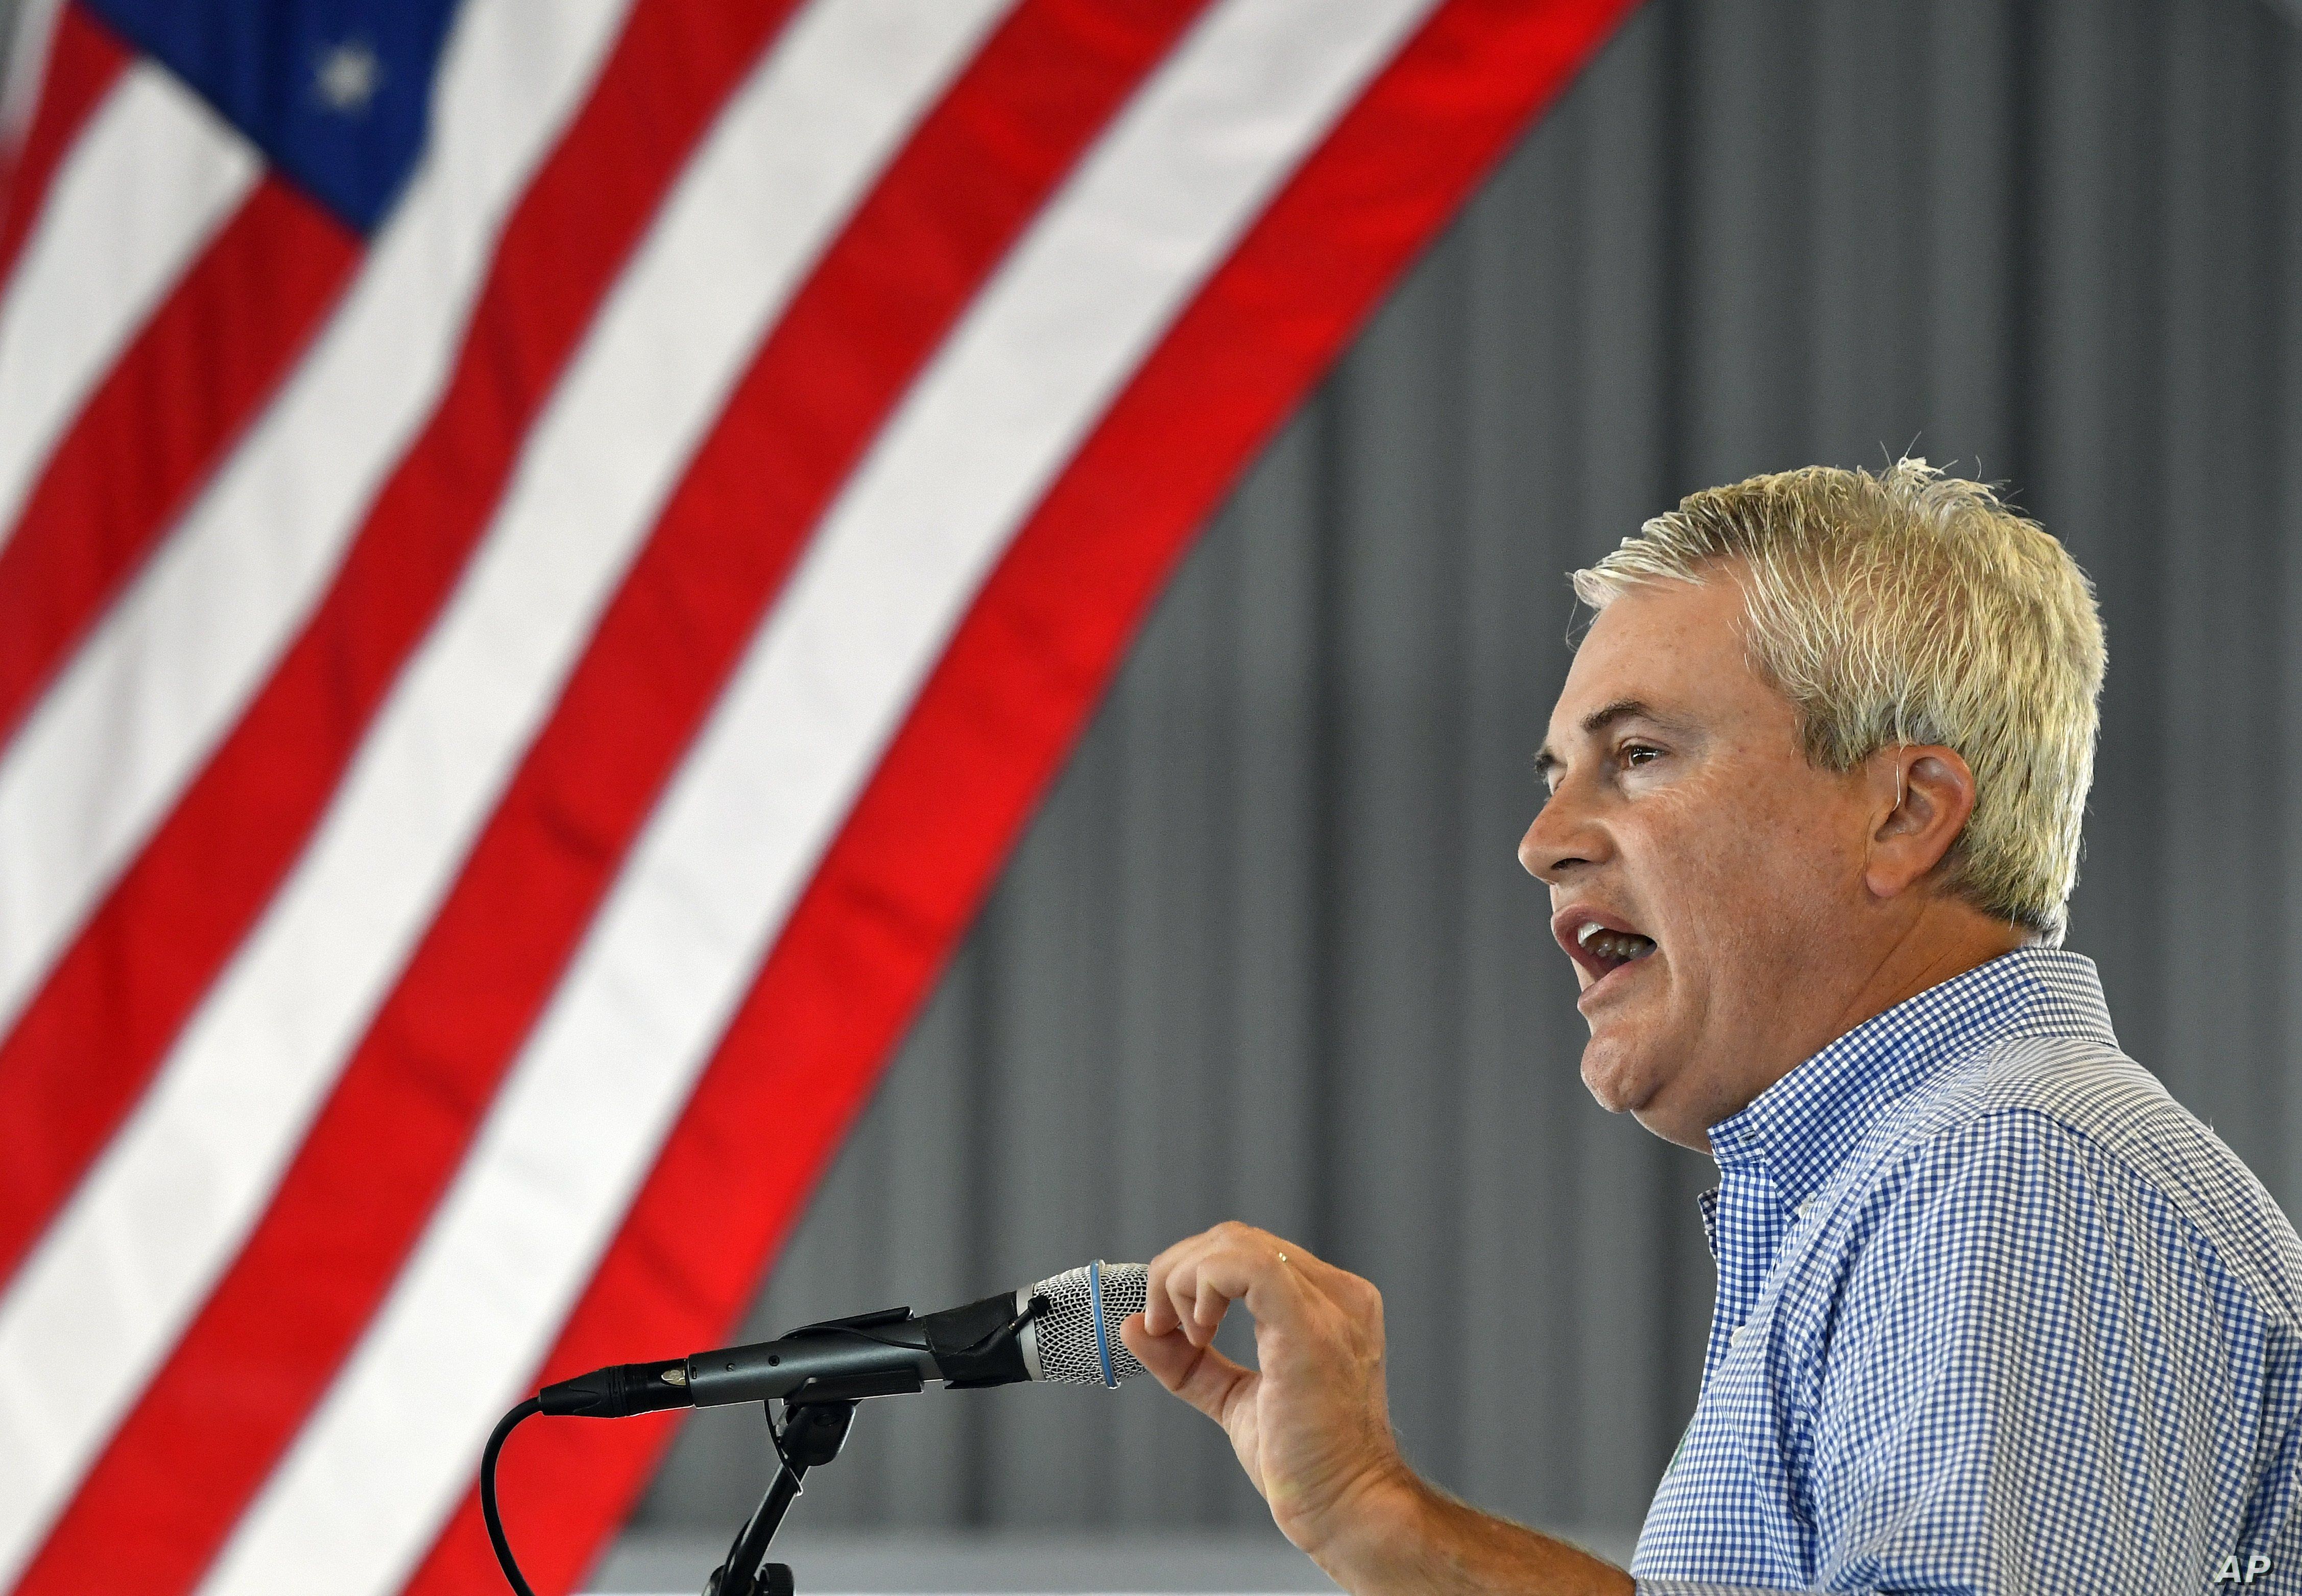 Rep. James Comer, R-Ky., speaks to the audience gathered at the 138th annual Fancy Farm Picnic, Saturday, Aug. 4, 2018, in Fancy Farm, Ky. (AP Photo/Timothy D. Easley)